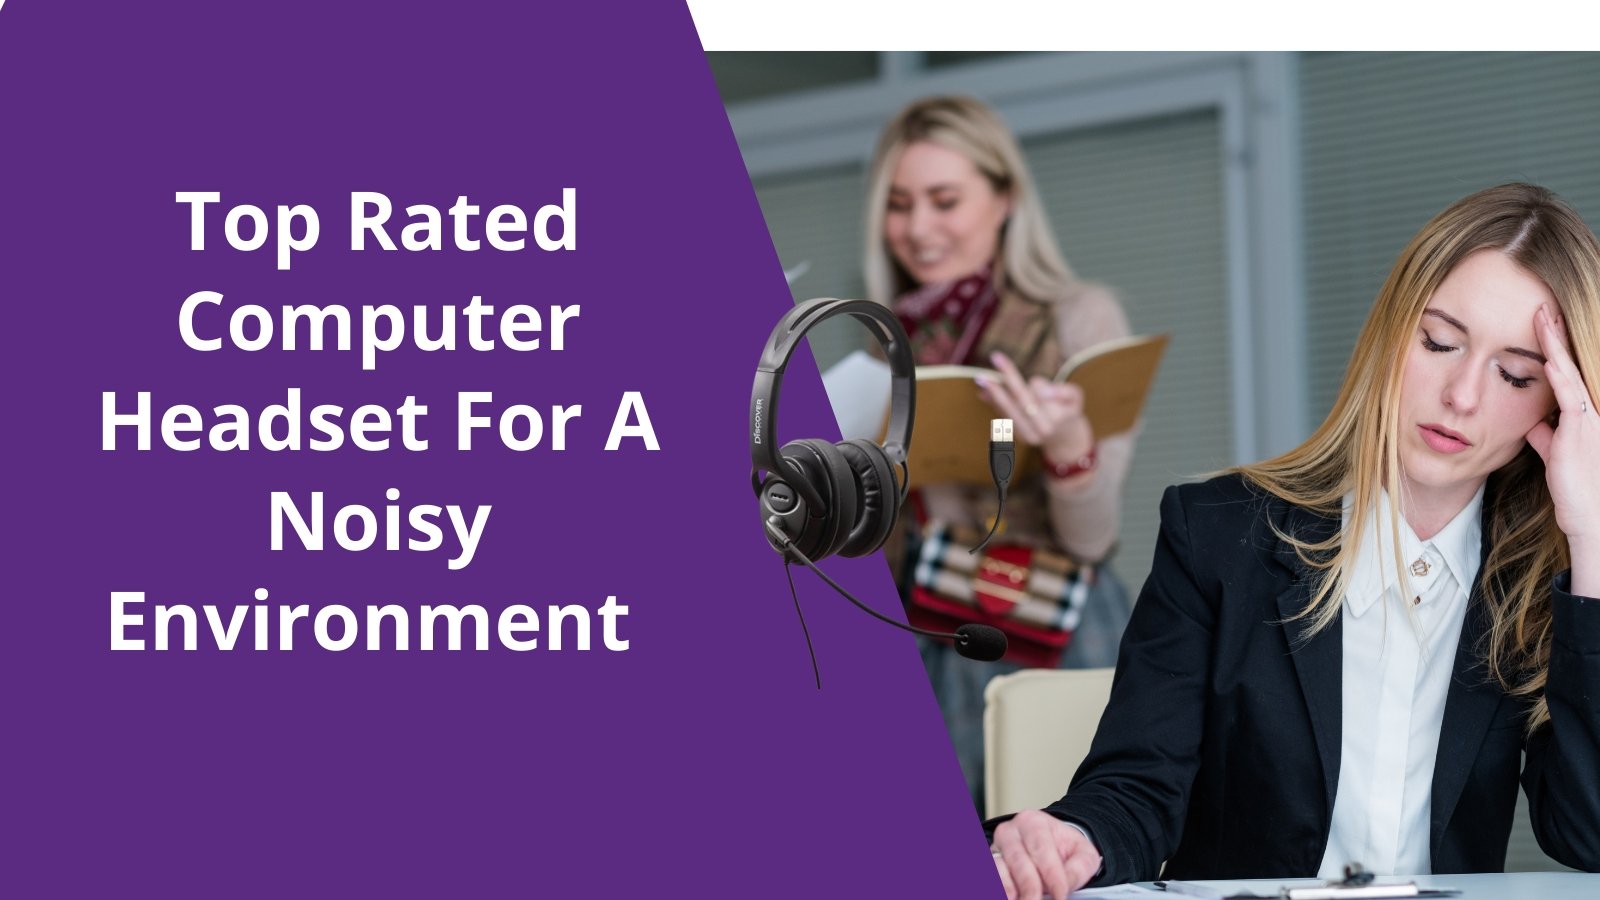 Top Rated Computer Headset For A Noisy Environment - Headset Advisor